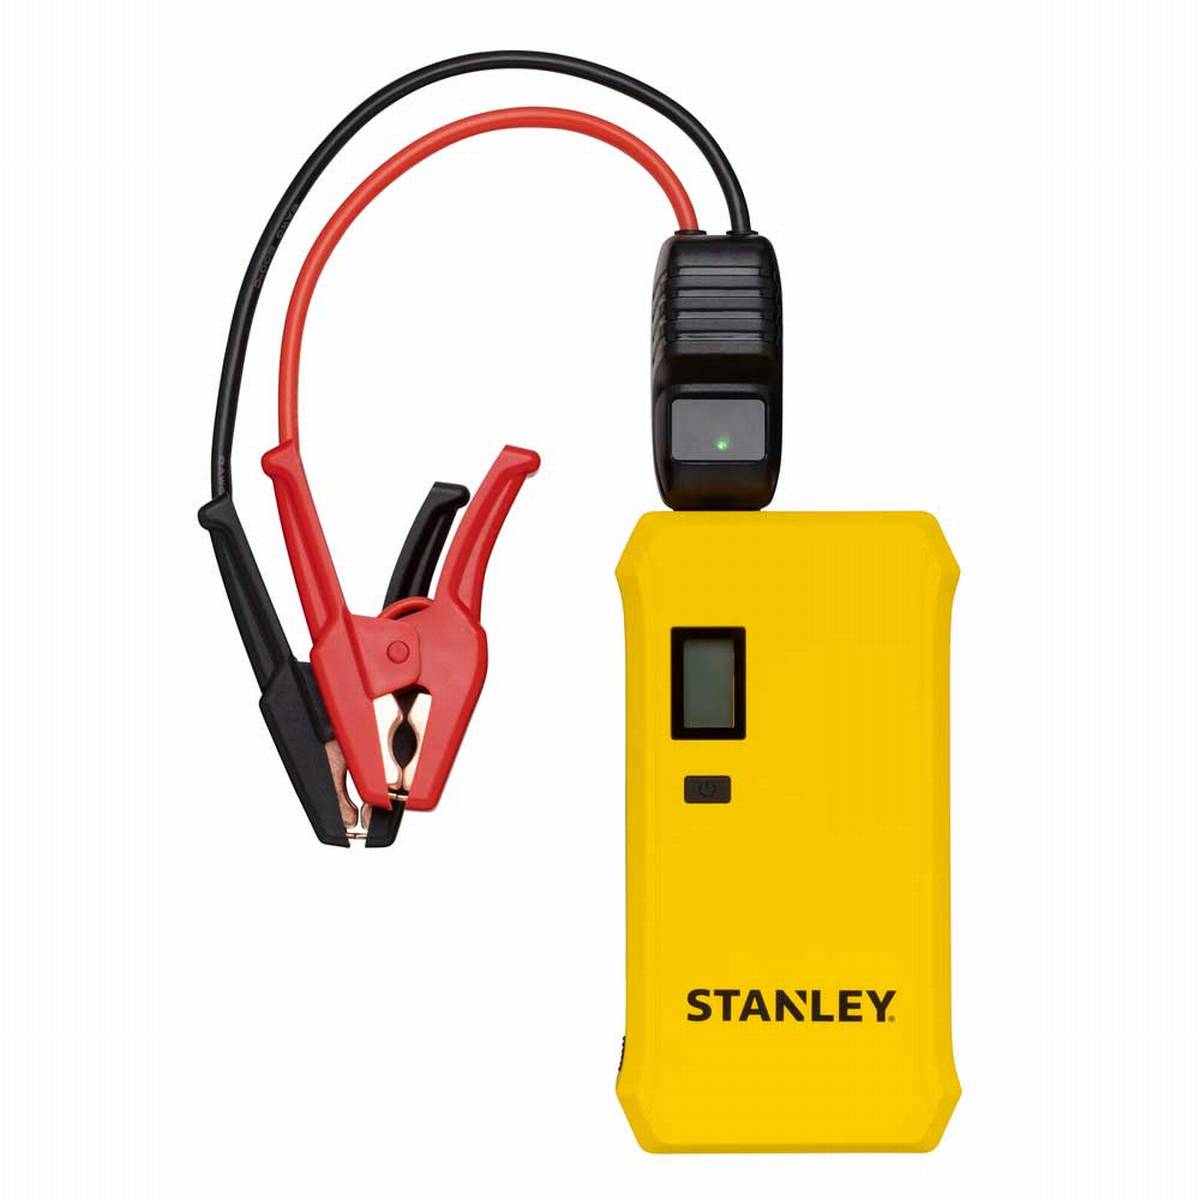 Stanley Booster Powerbank & Jump Starter 12V 1000A 11200mAh USB 2.4A Quickcharge 3.0